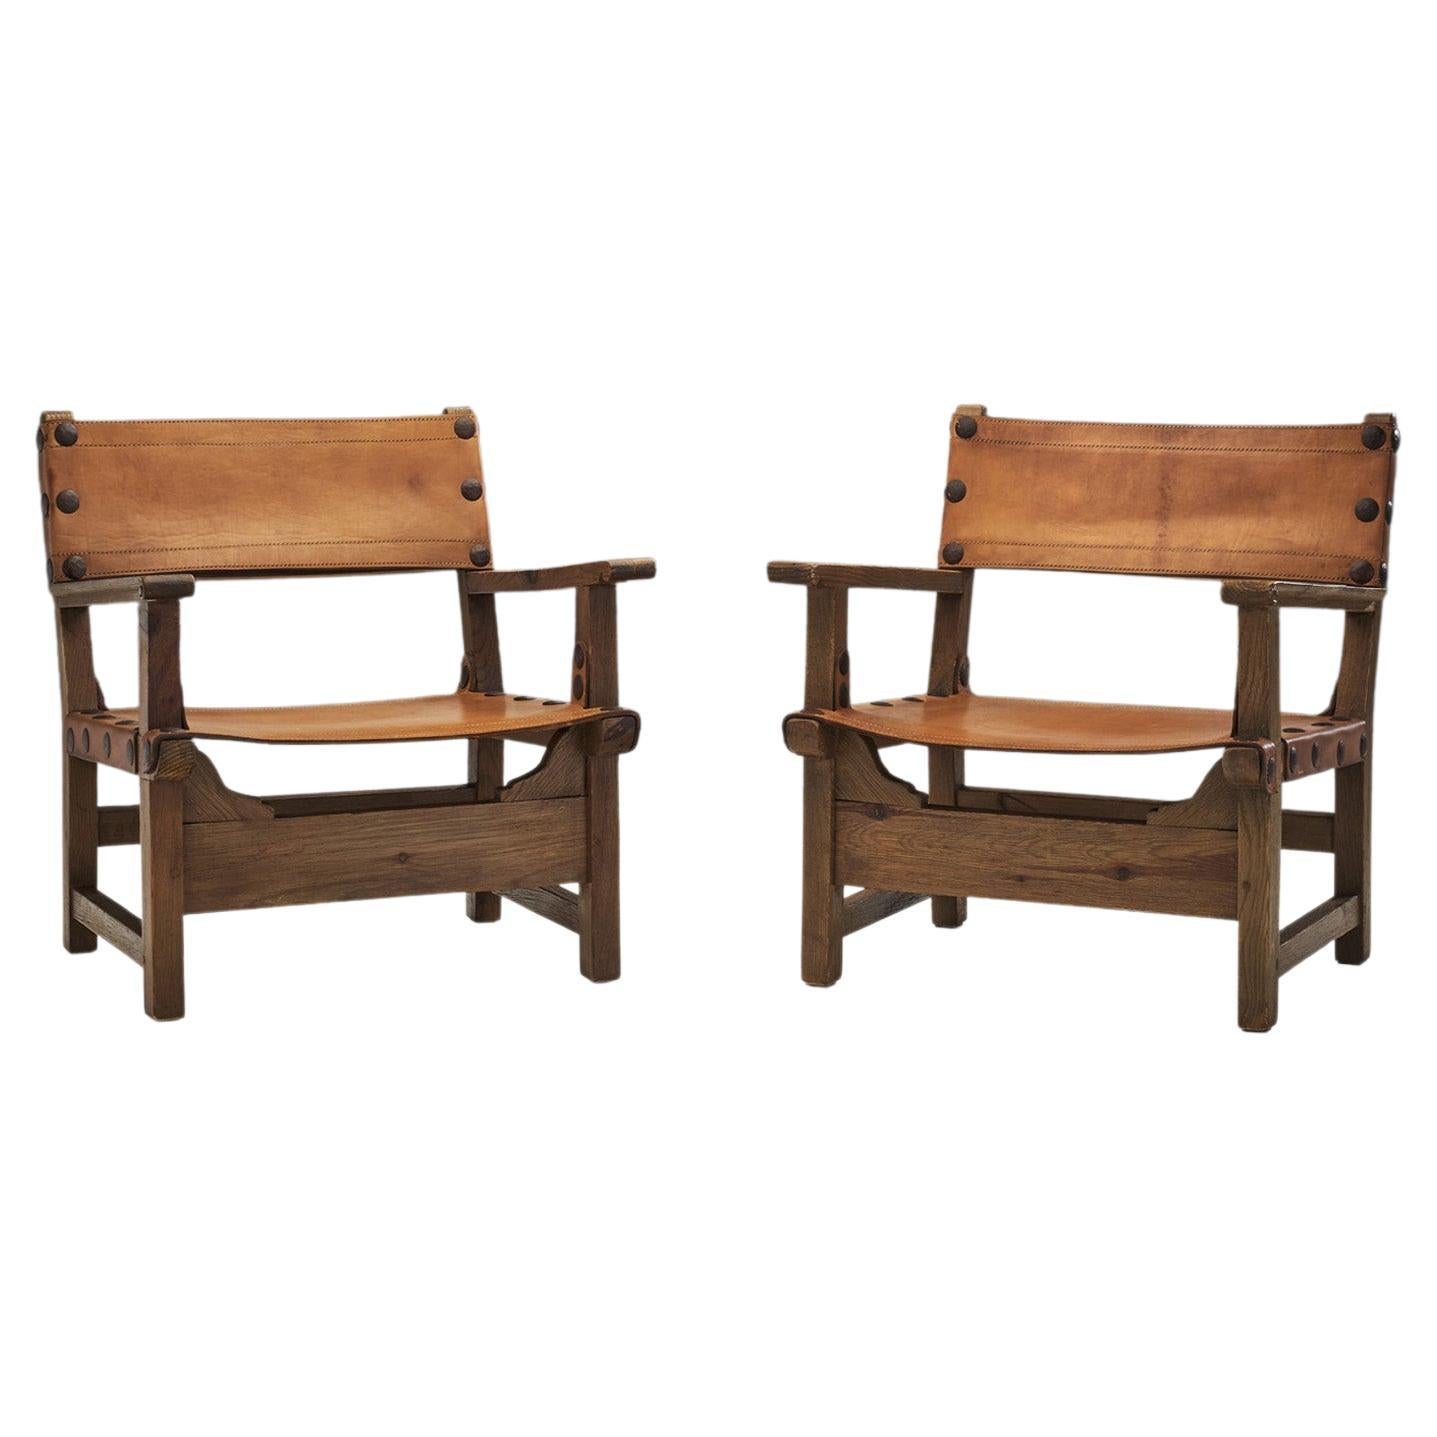 Wood and Cognac Leather "Spanish Chairs", Europe, 1960s For Sale